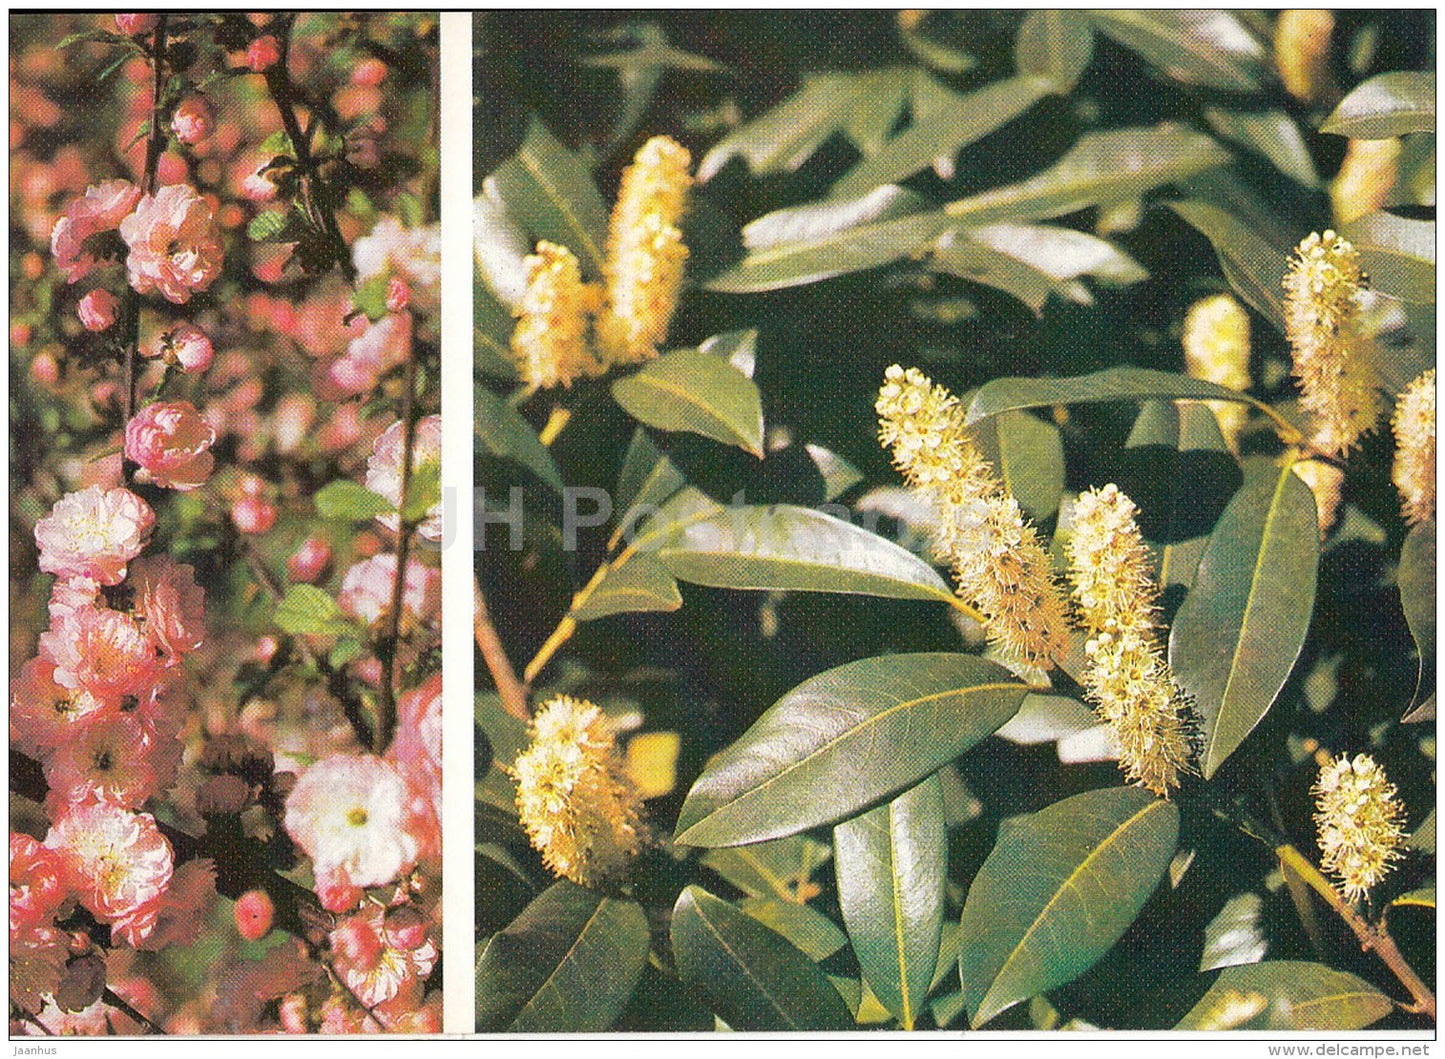 Amygdalus triloba , Floering Almond - Laurocerasus officinalis - Moscow Botanical Garden - 1988 - Russia USSR - unused - JH Postcards